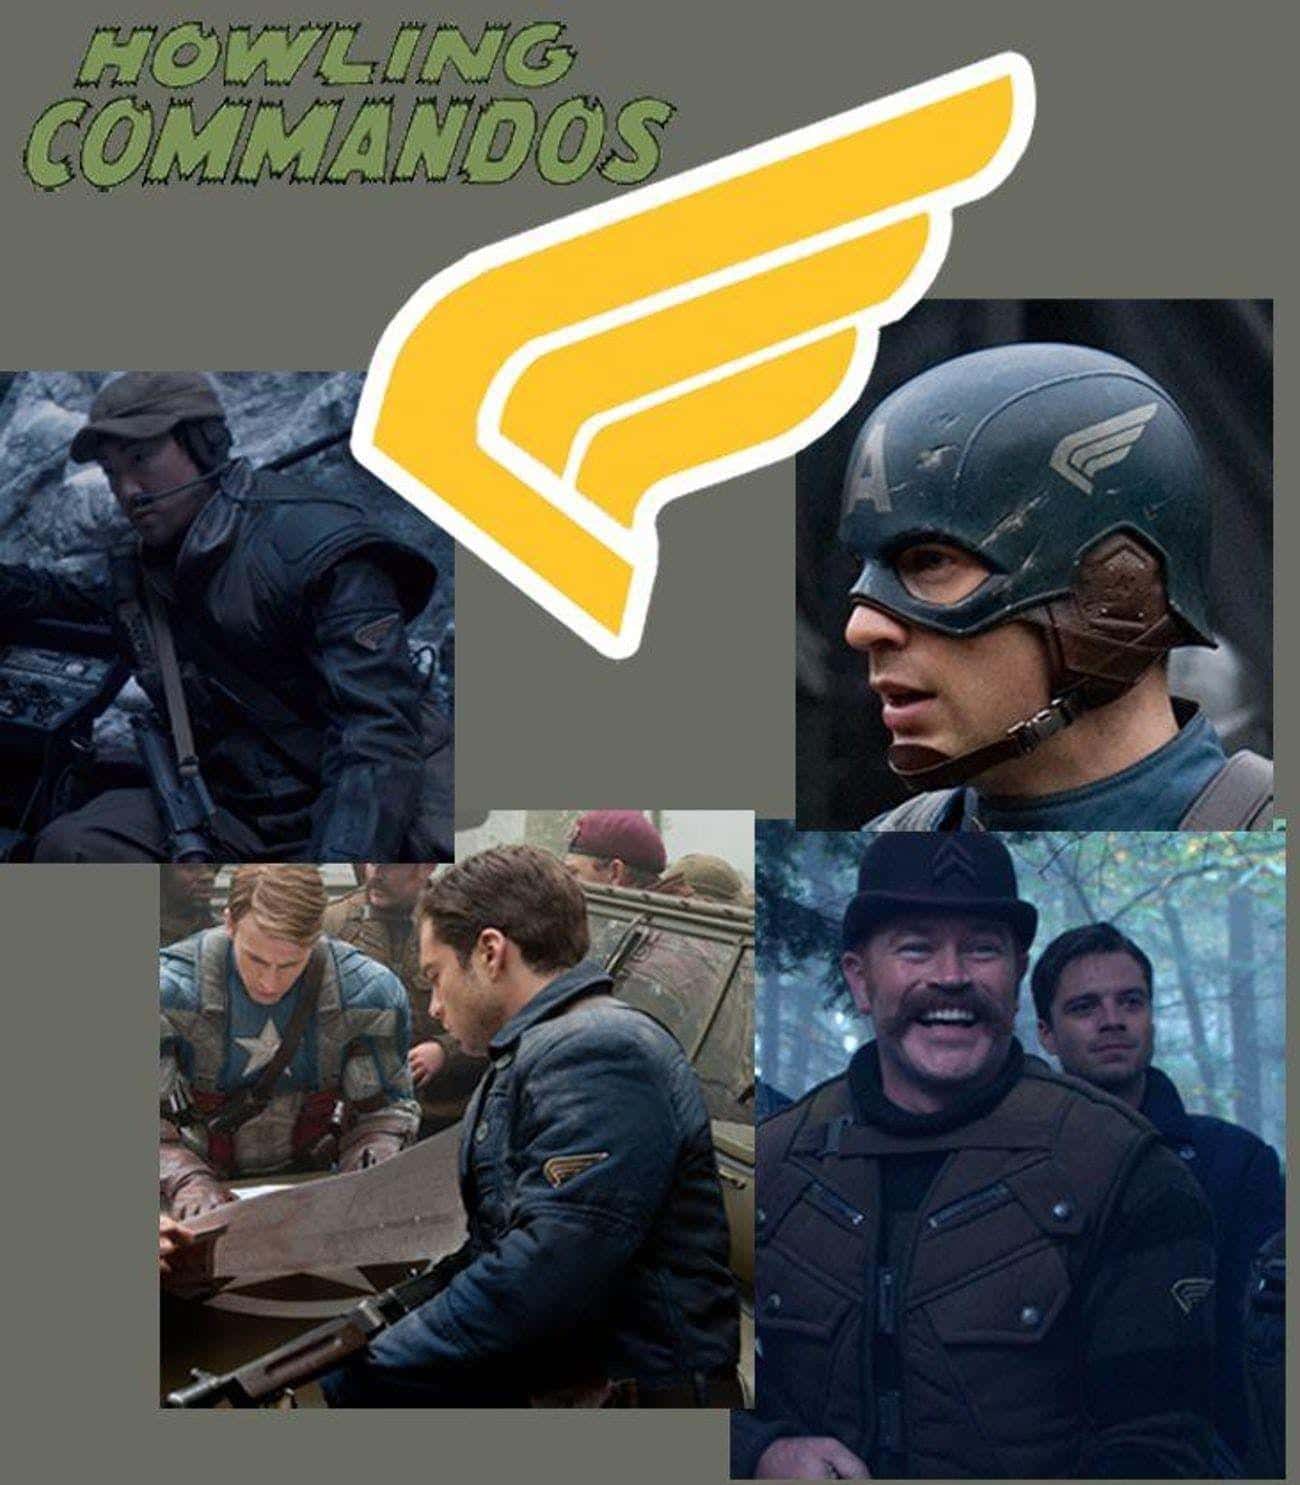 The Howling Commandos Have Their Own Insignia